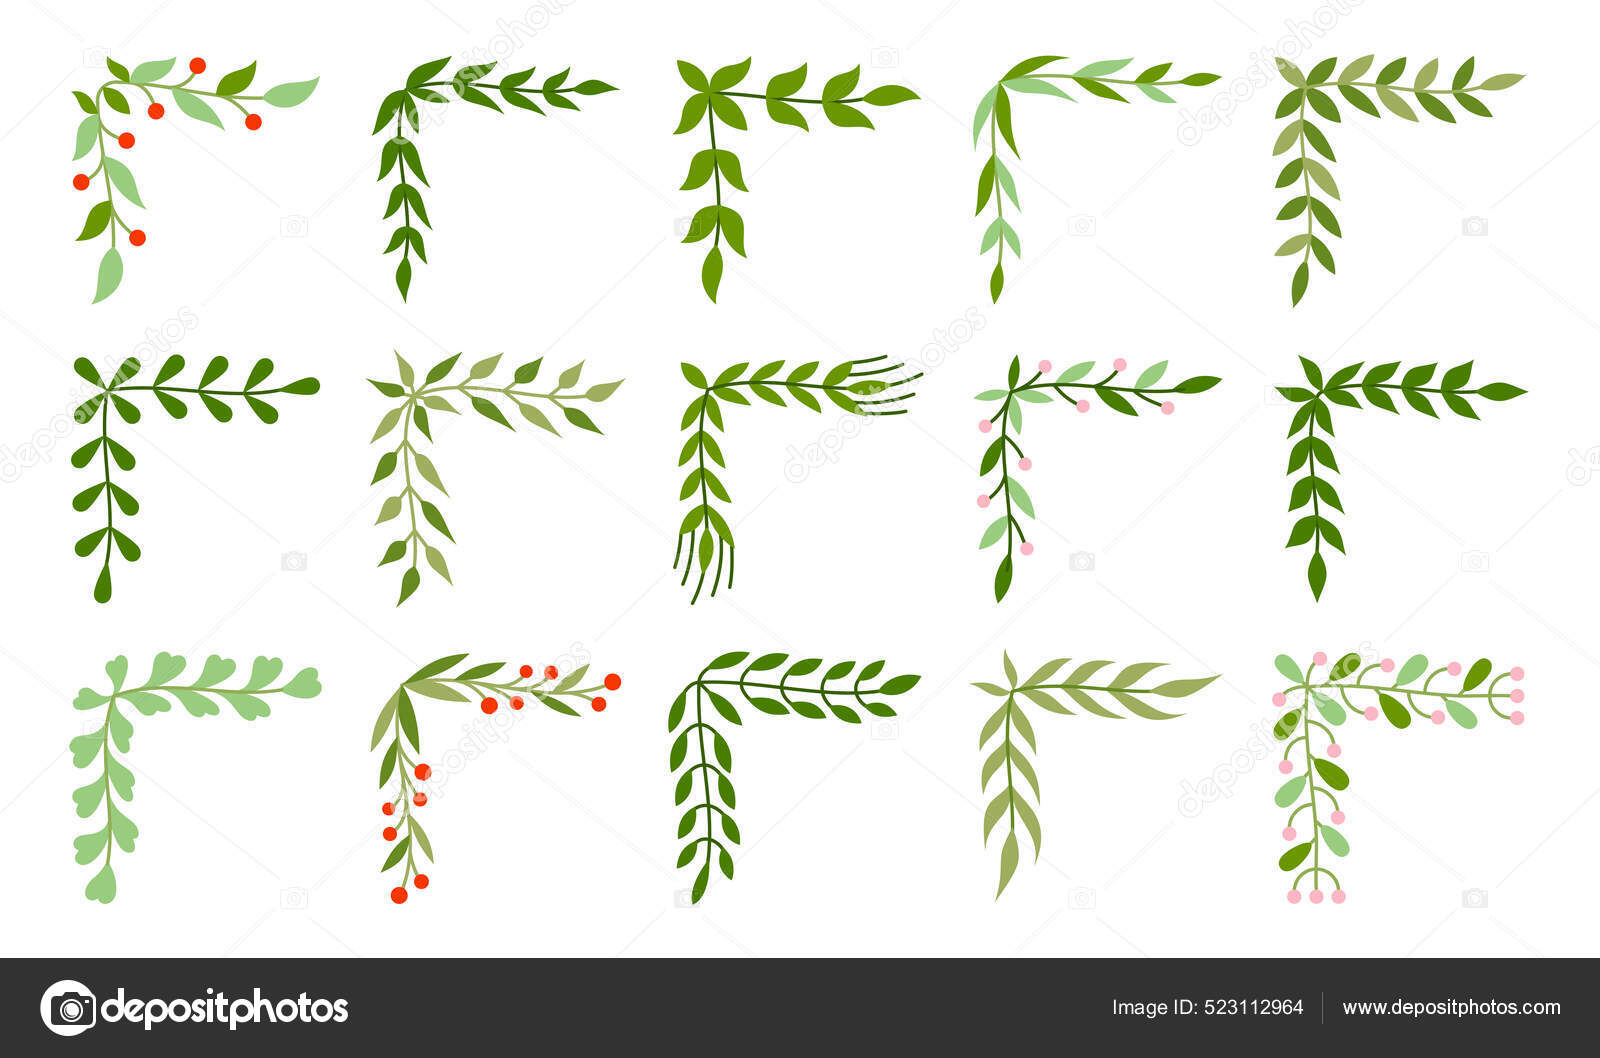 Frame corners with green leaves or foliage Vector Image